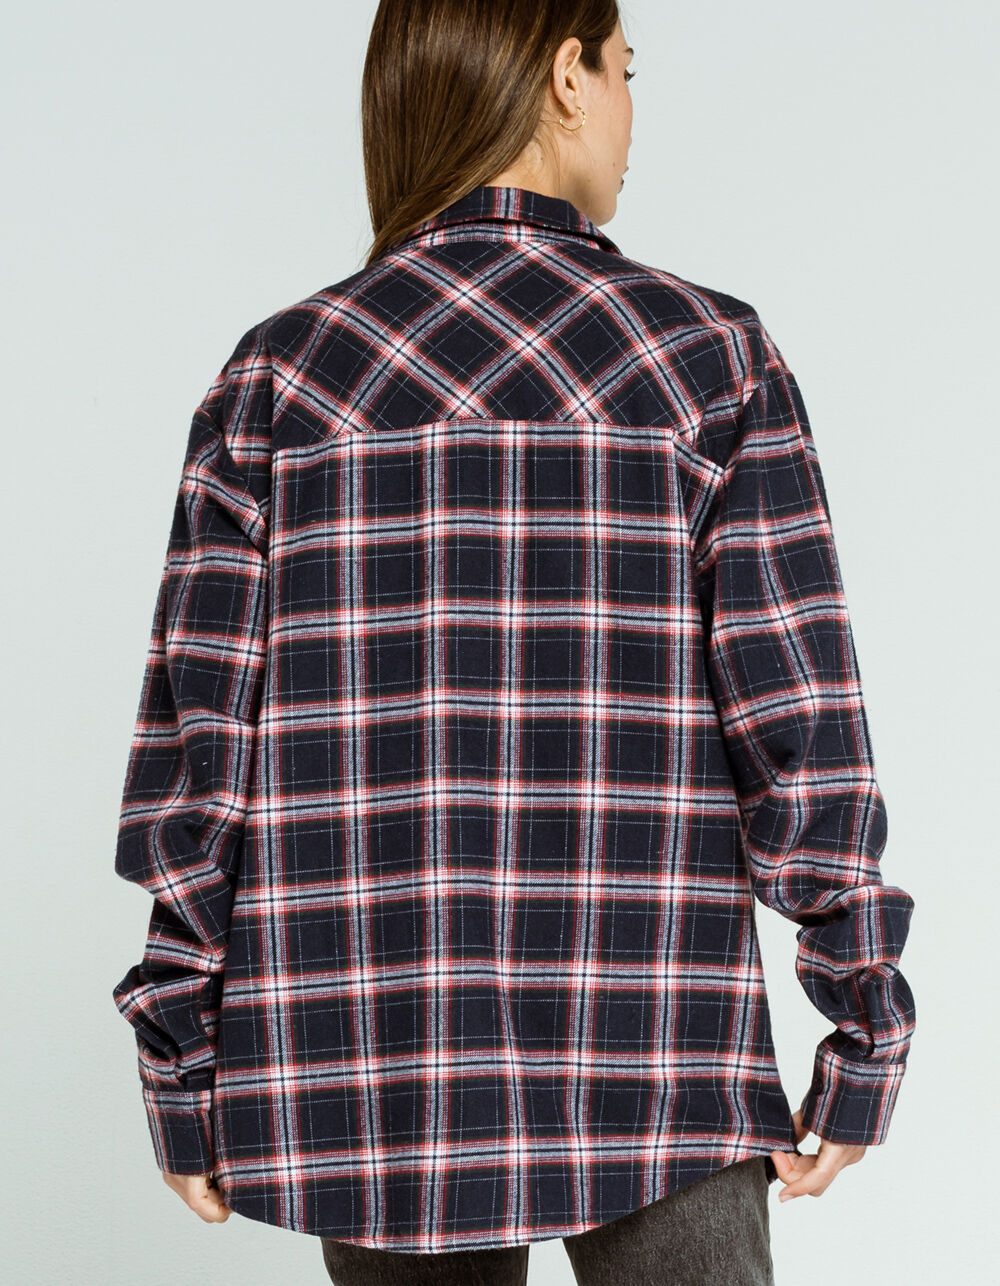 RSQ Plaid Womens Navy & Red Flannel Shirt - NAVY/RED | Tillys